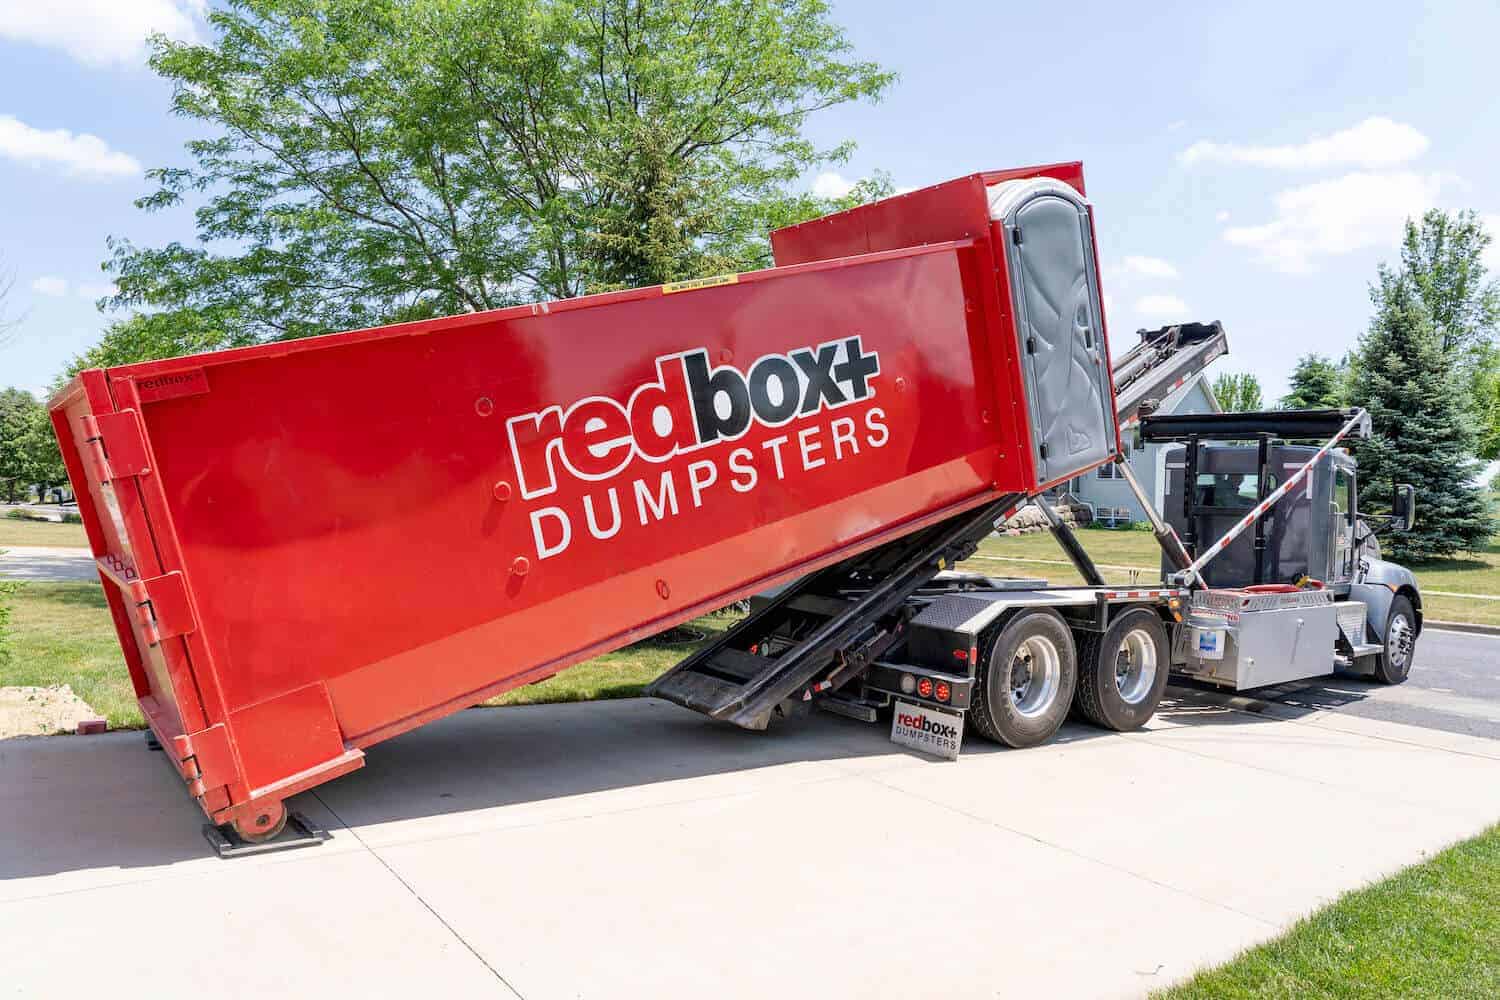 roll off dumpster rental in killeen and Georgetown tx